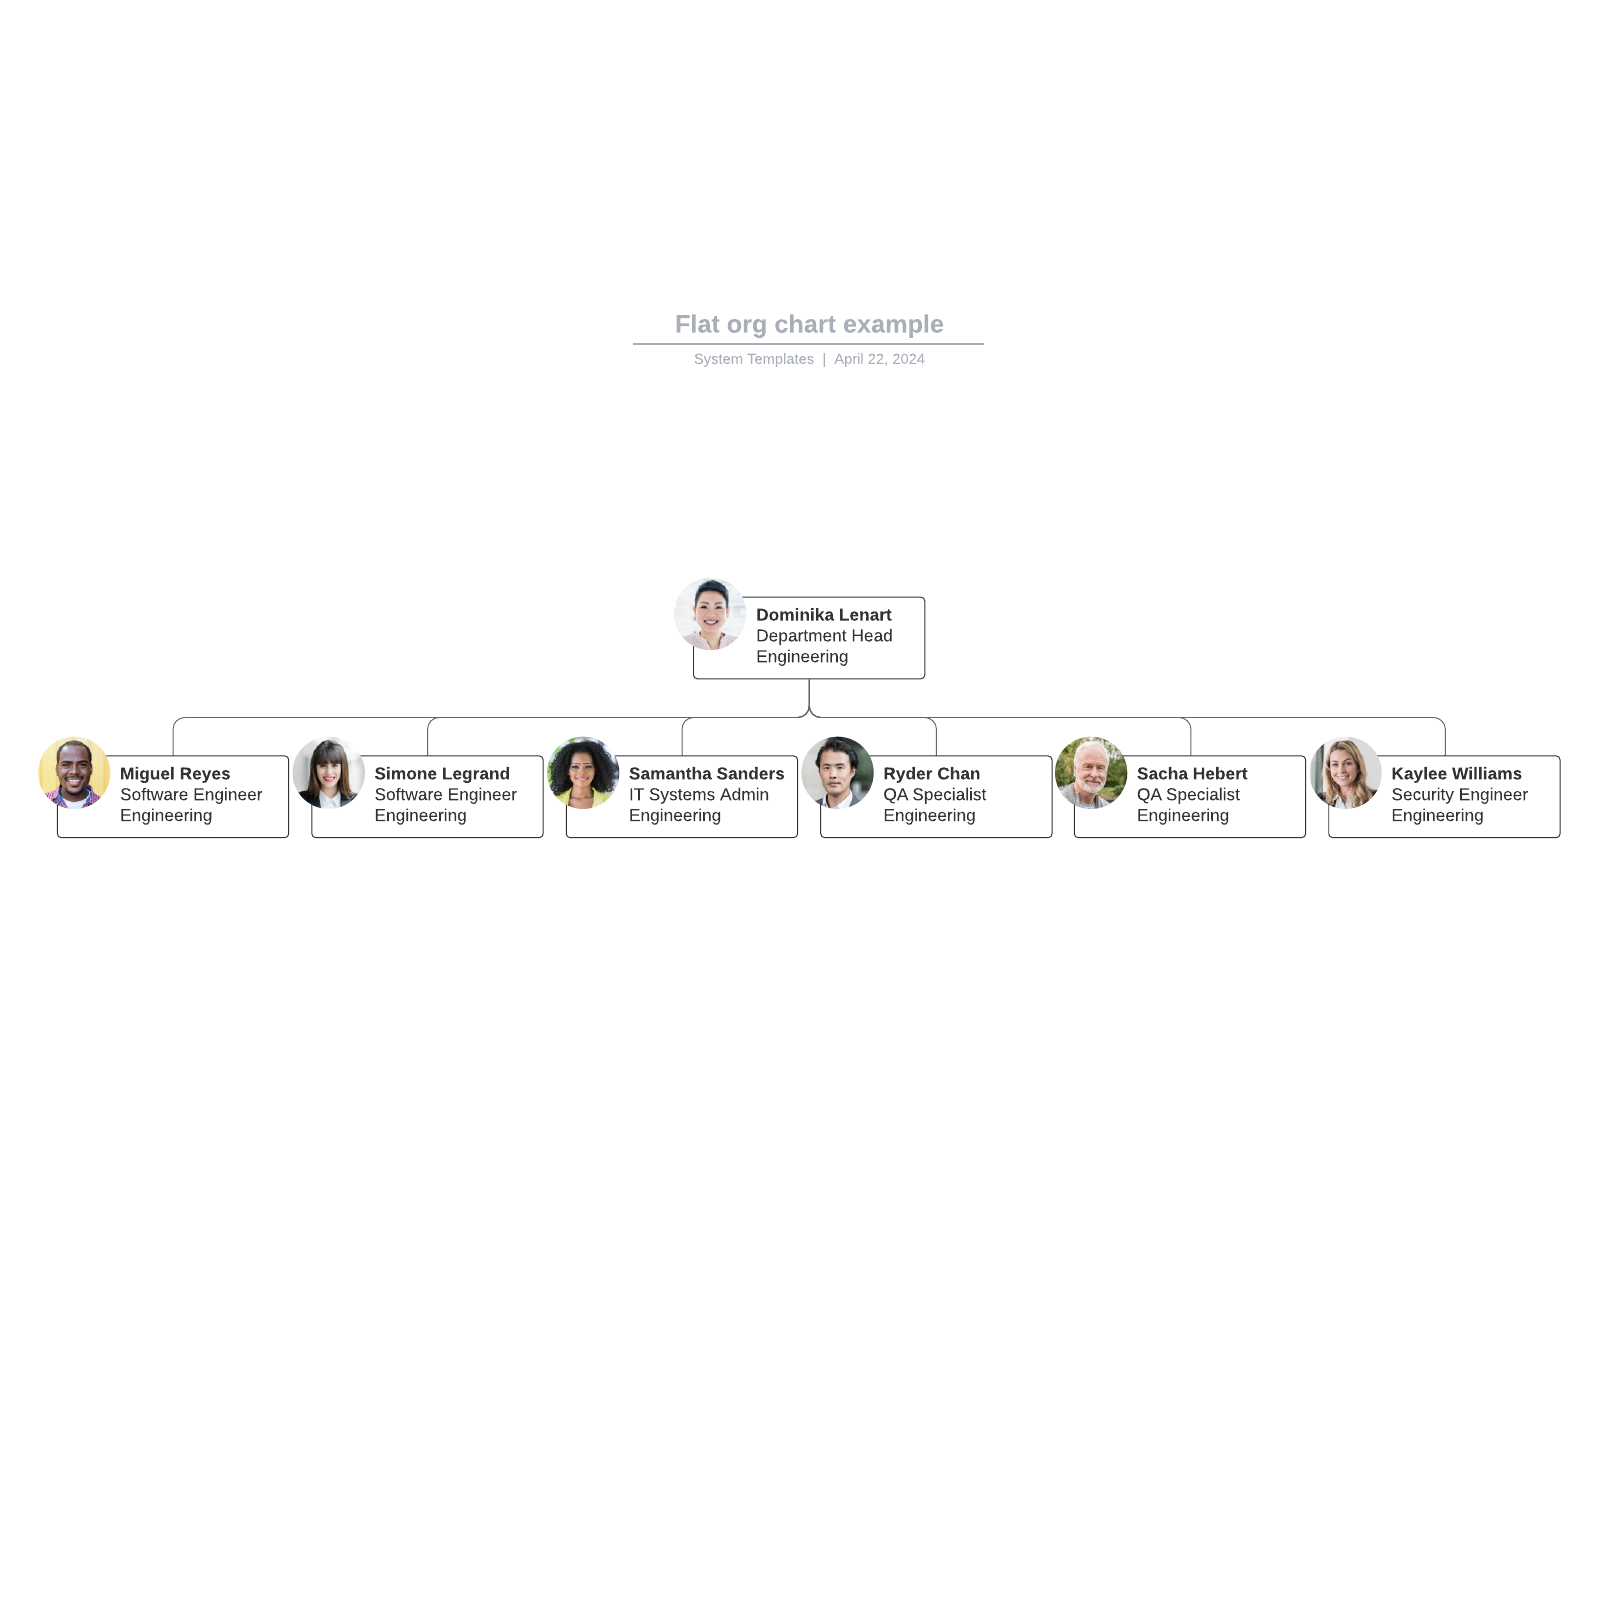 Flat org chart example example